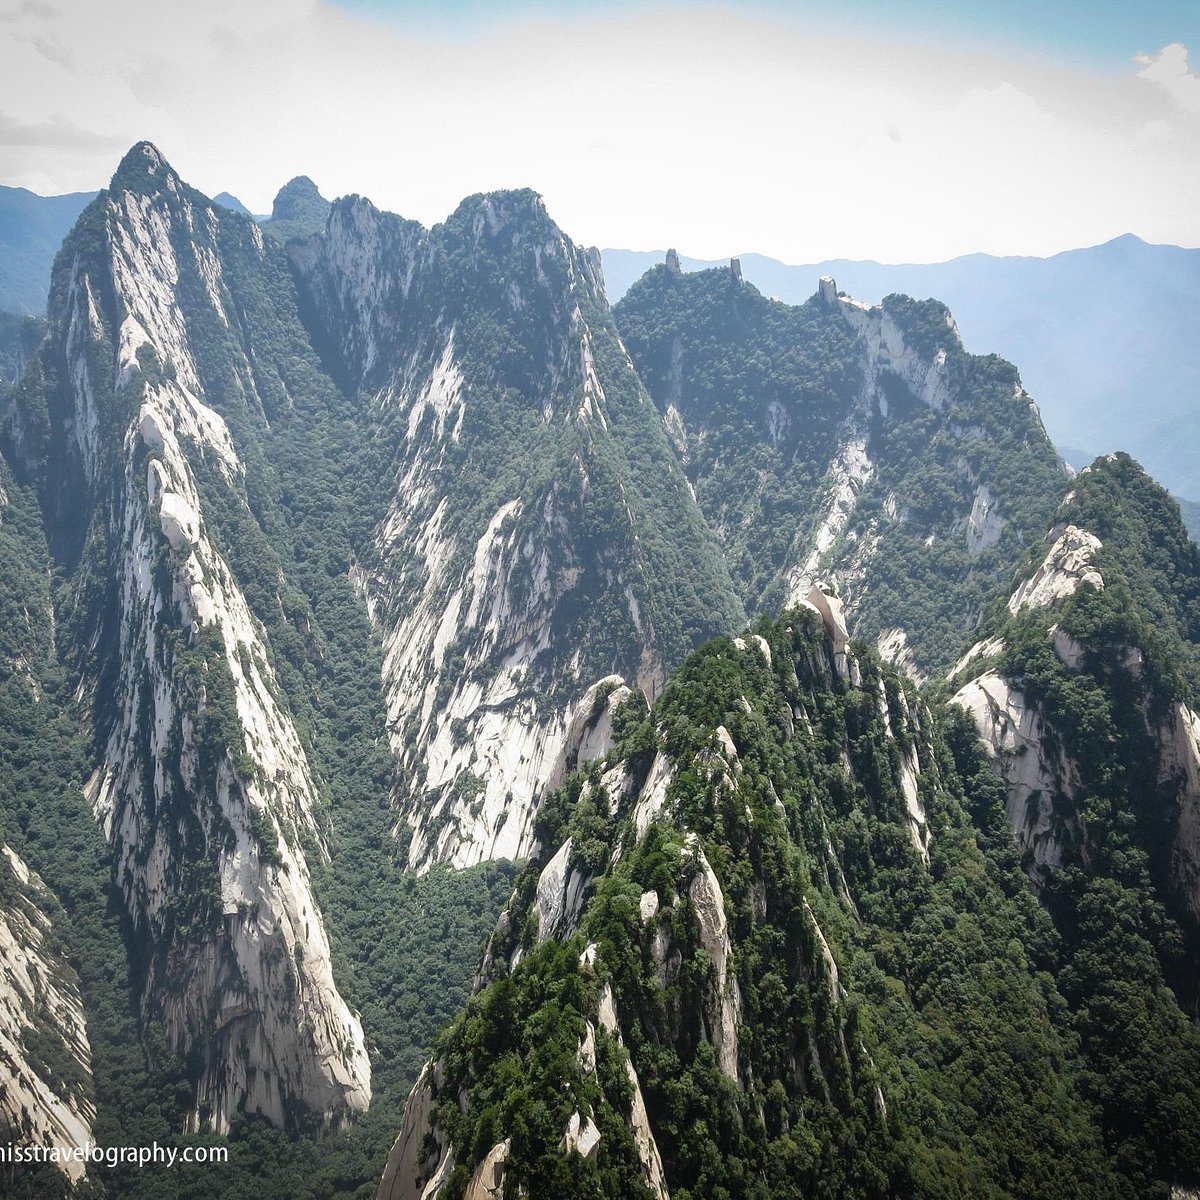 How Easy or Difficult it is to Climb the Steep Staircase of the Steepest  Mountain in HuaShan, China?